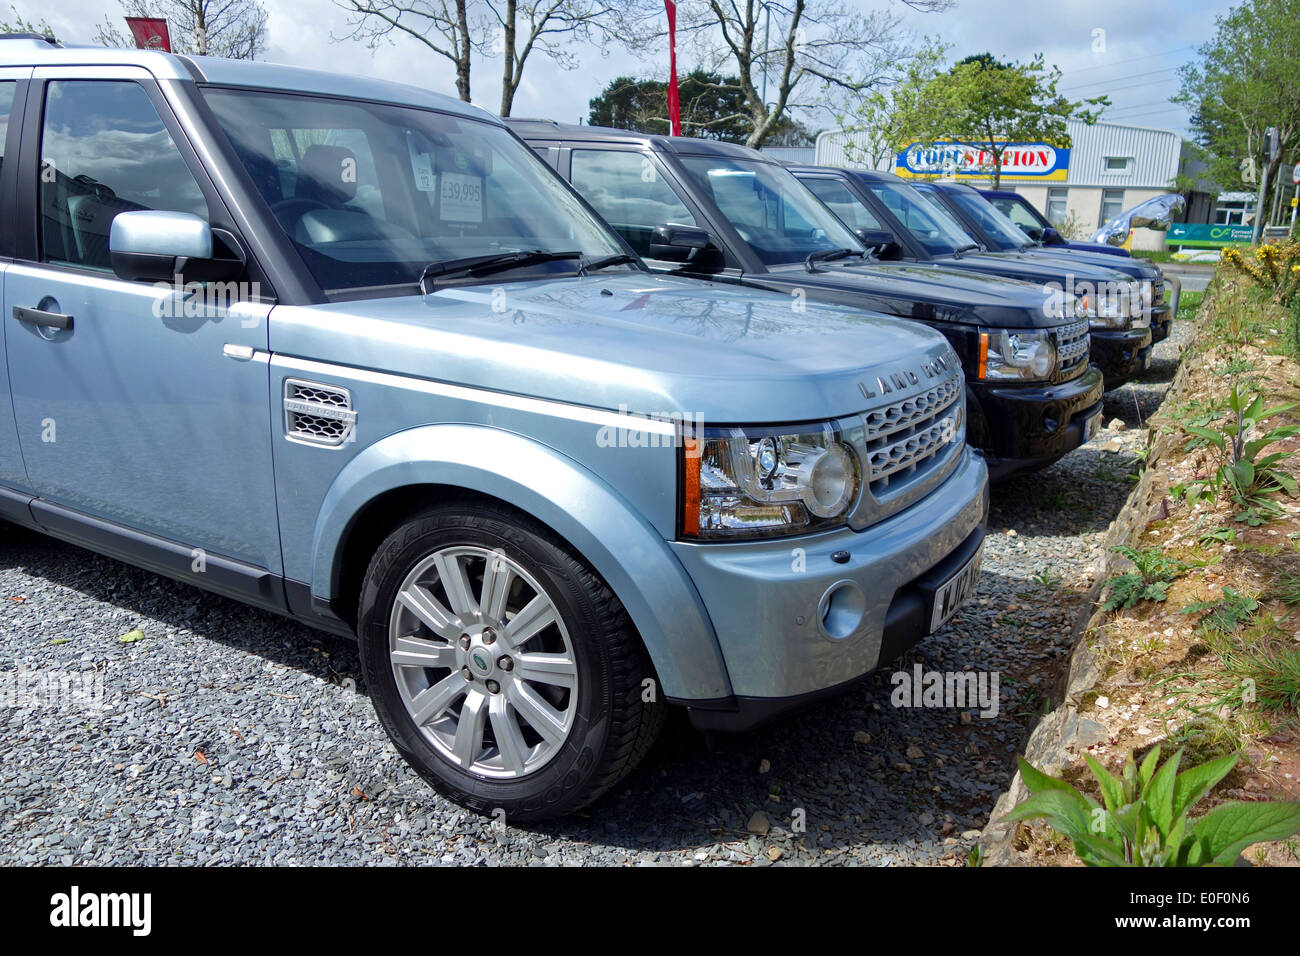 Land Rovers for sale on a second hand car sales forcourt Stock Photo